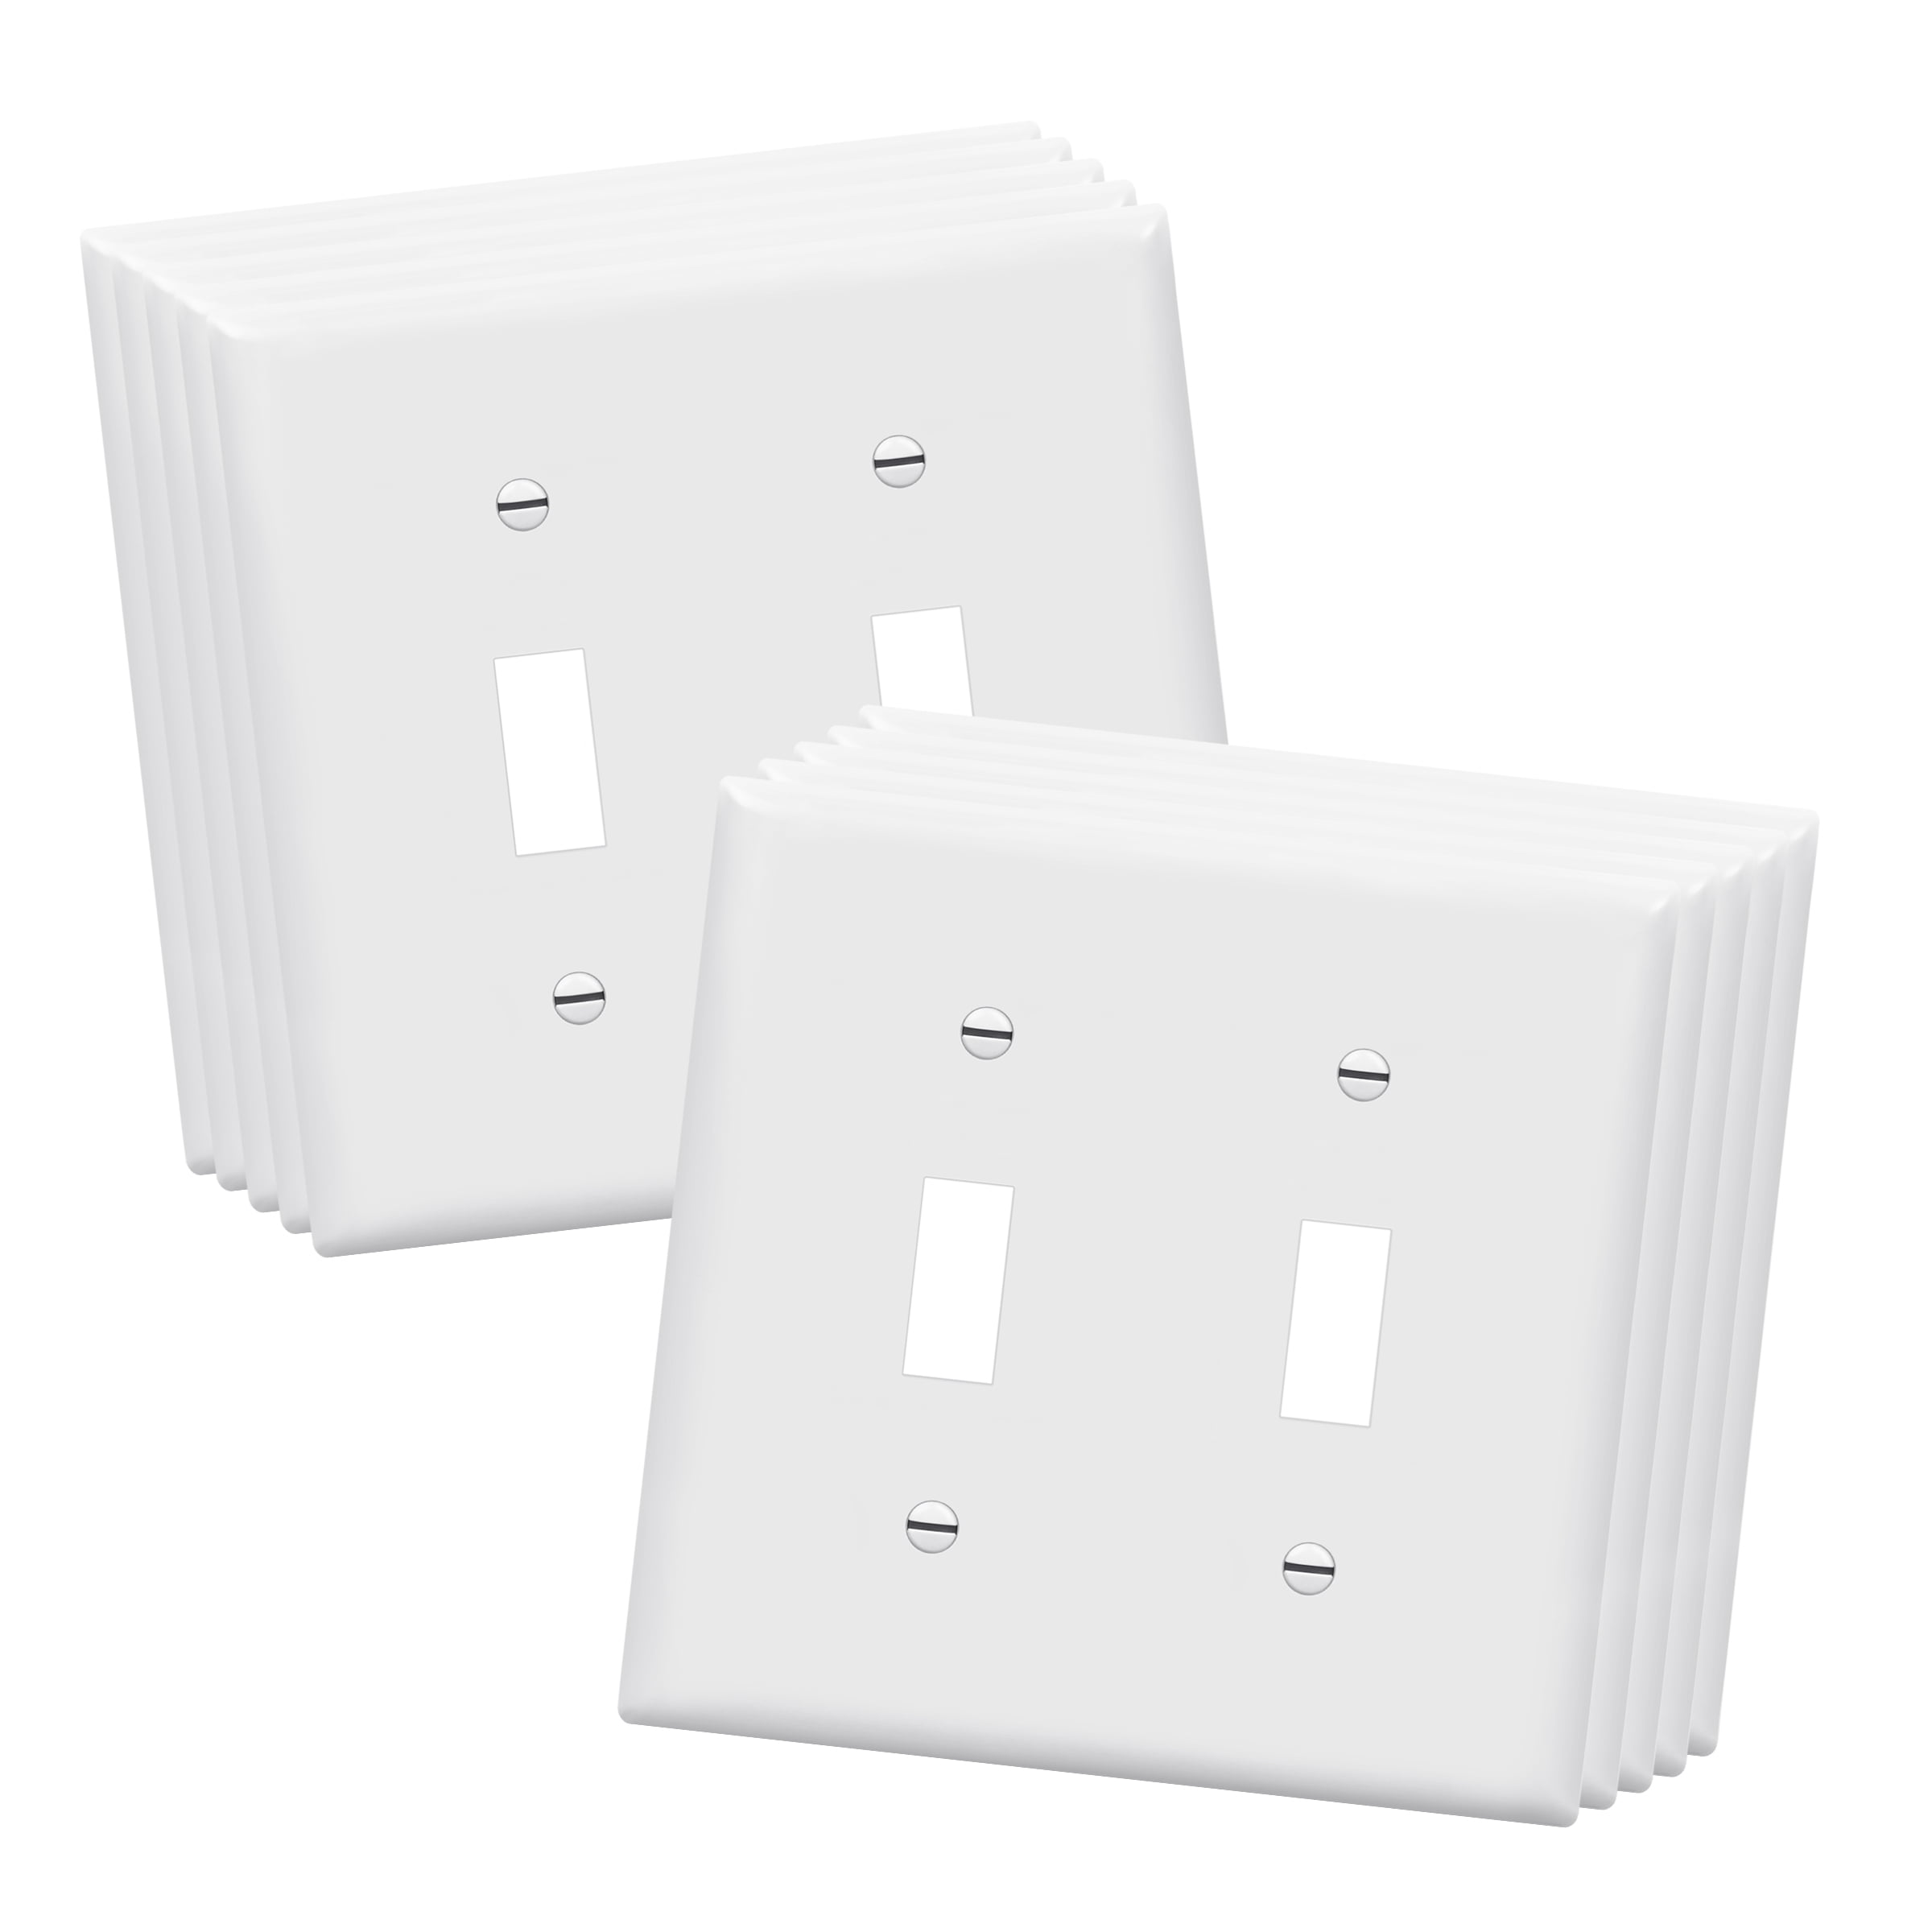 WHITE 10 PACK 1-GANG SCREWLESS DECORATOR WALL PLATES CHILD SAFE OUTLET COVERS 